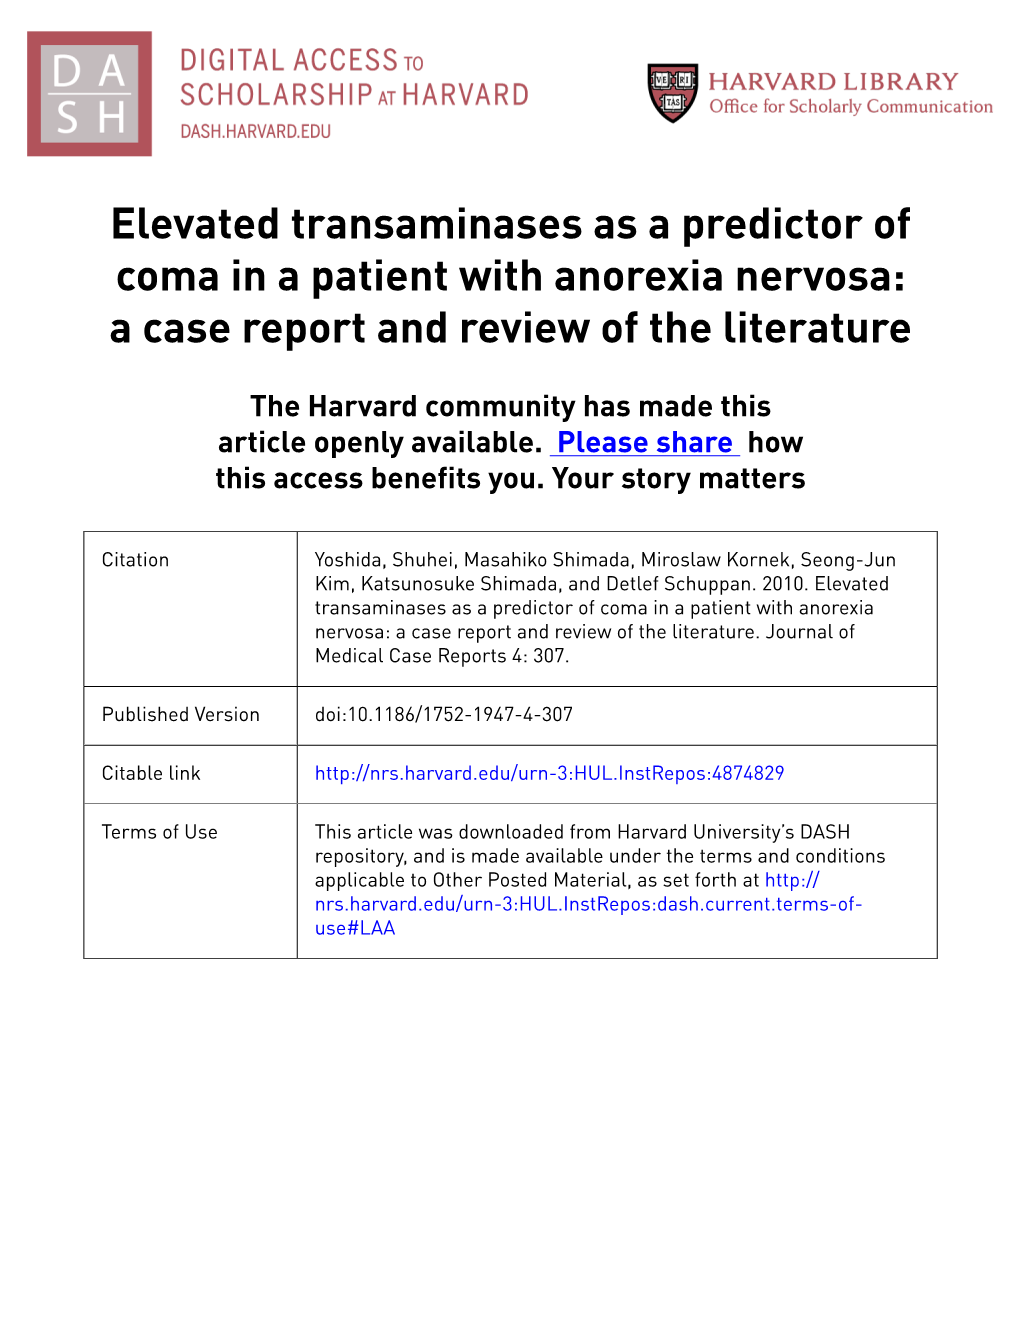 Elevated Transaminases As a Predictor of Coma in a Patient with Anorexia Nervosa: a Case Report and Review of the Literature